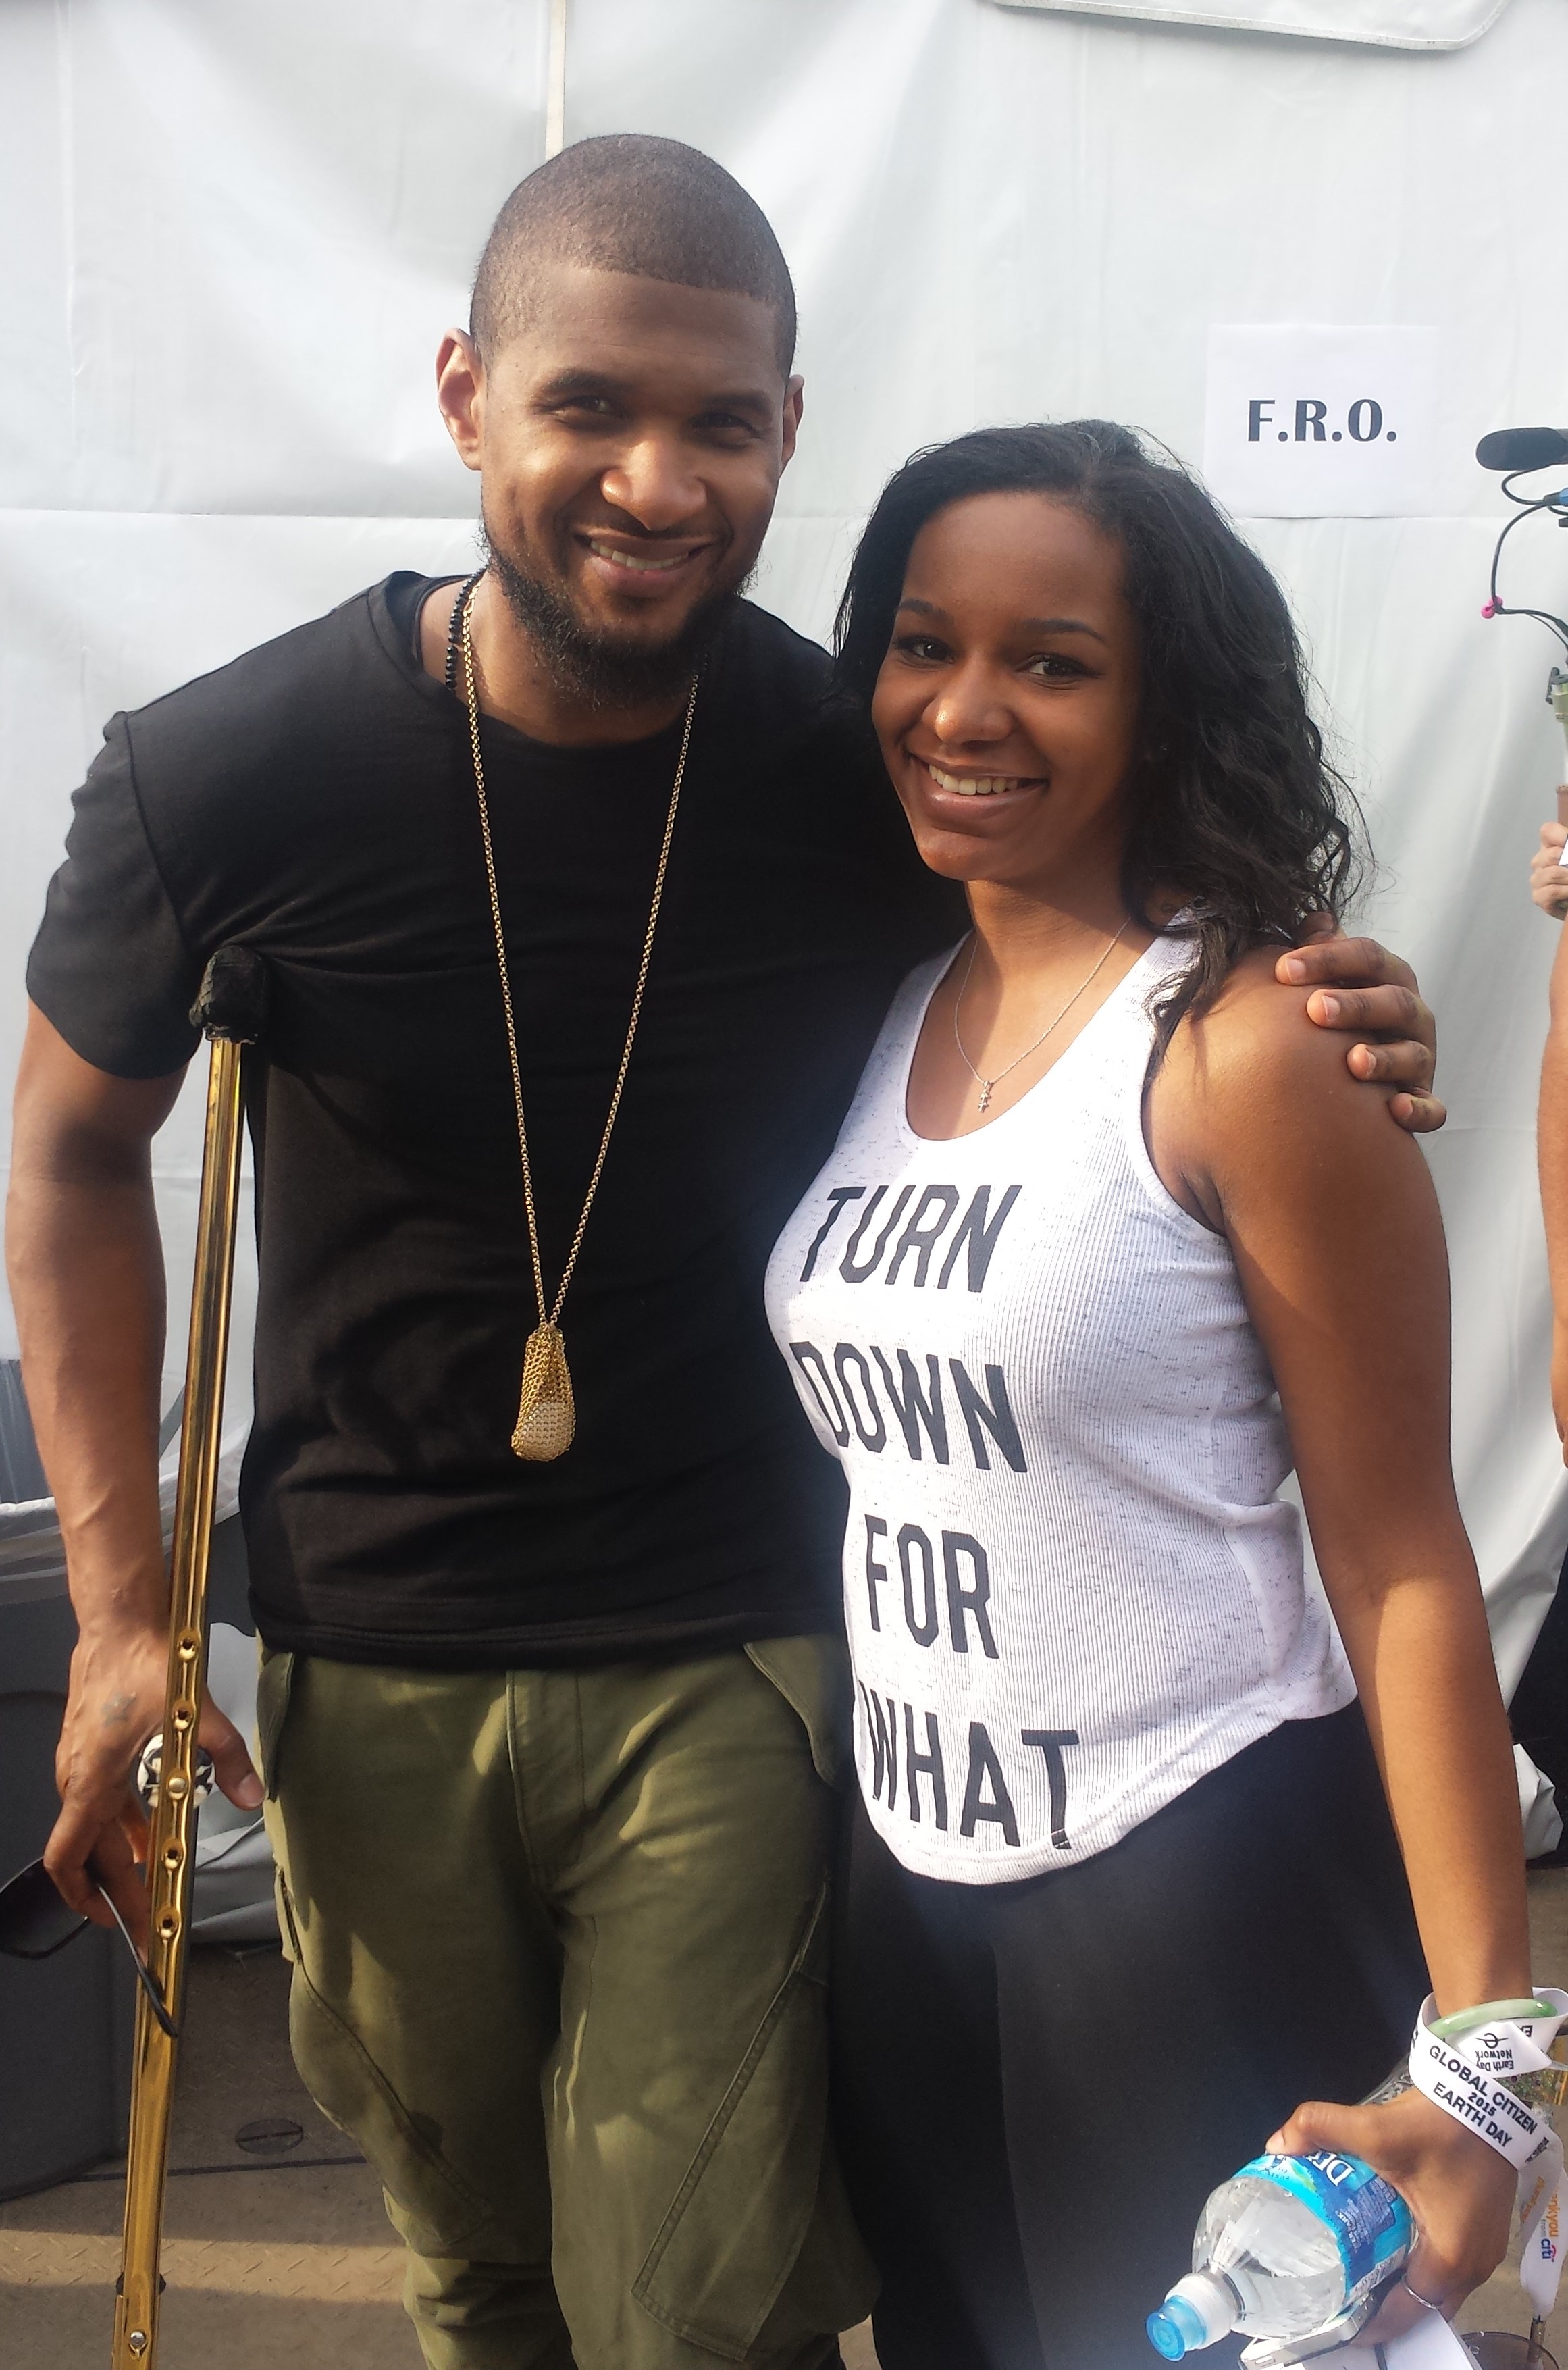 Usher and Brittney A. Thomas at The Global Citizen Earth Day Festival (2015)